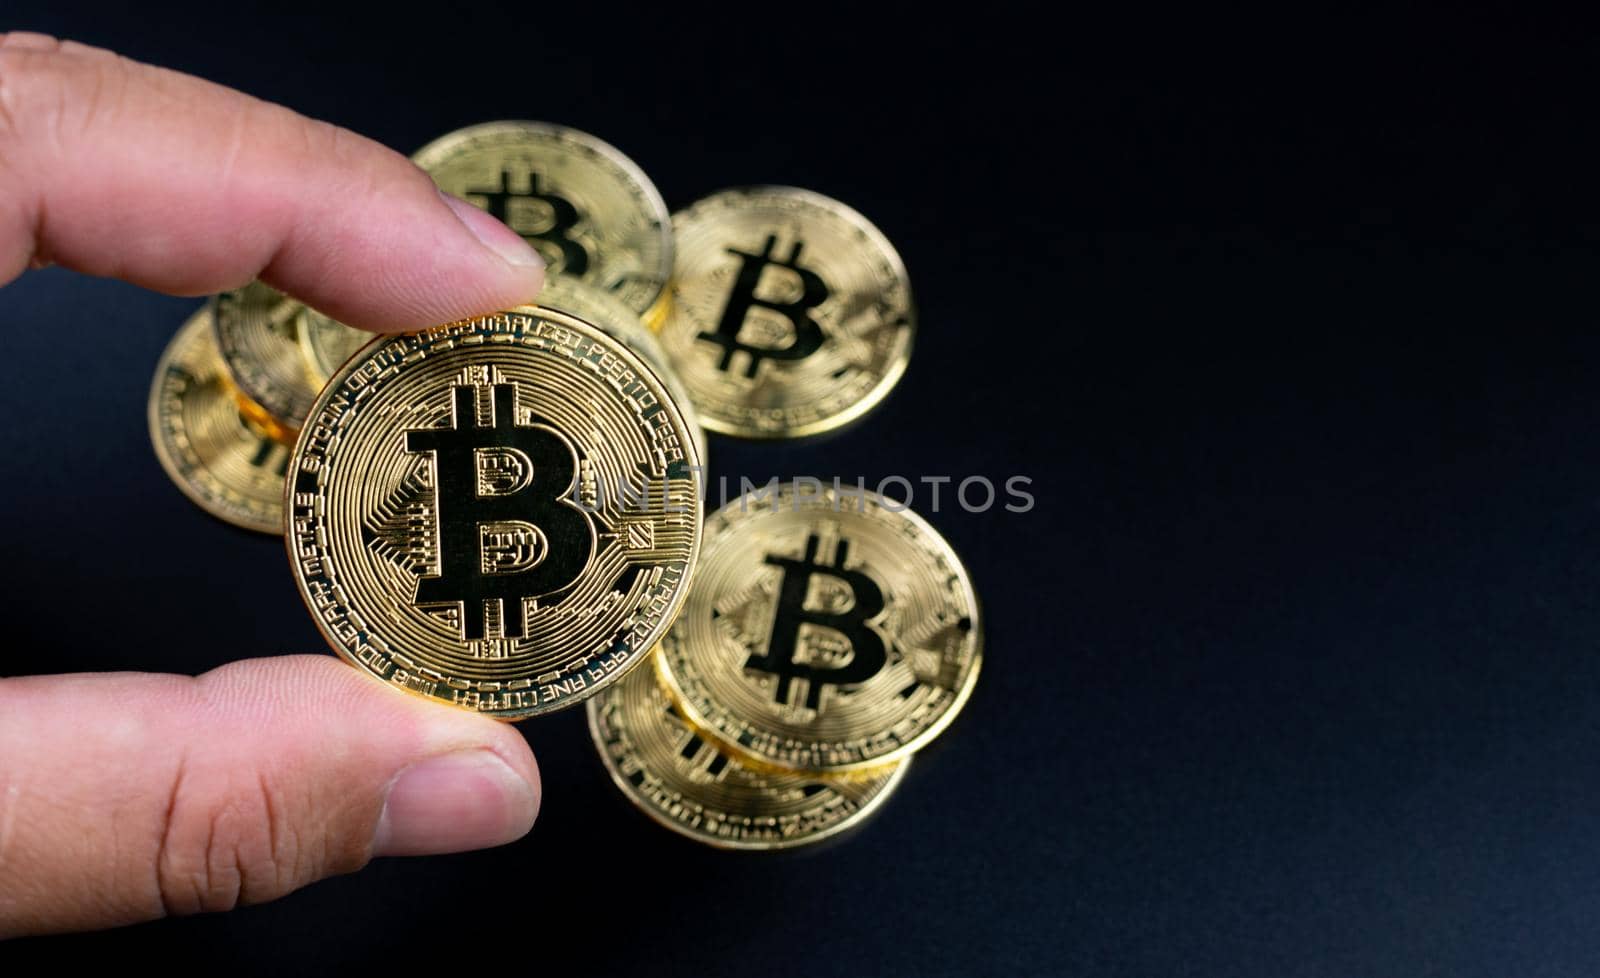 Human fingers holding bitcoins on a black background by Unimages2527